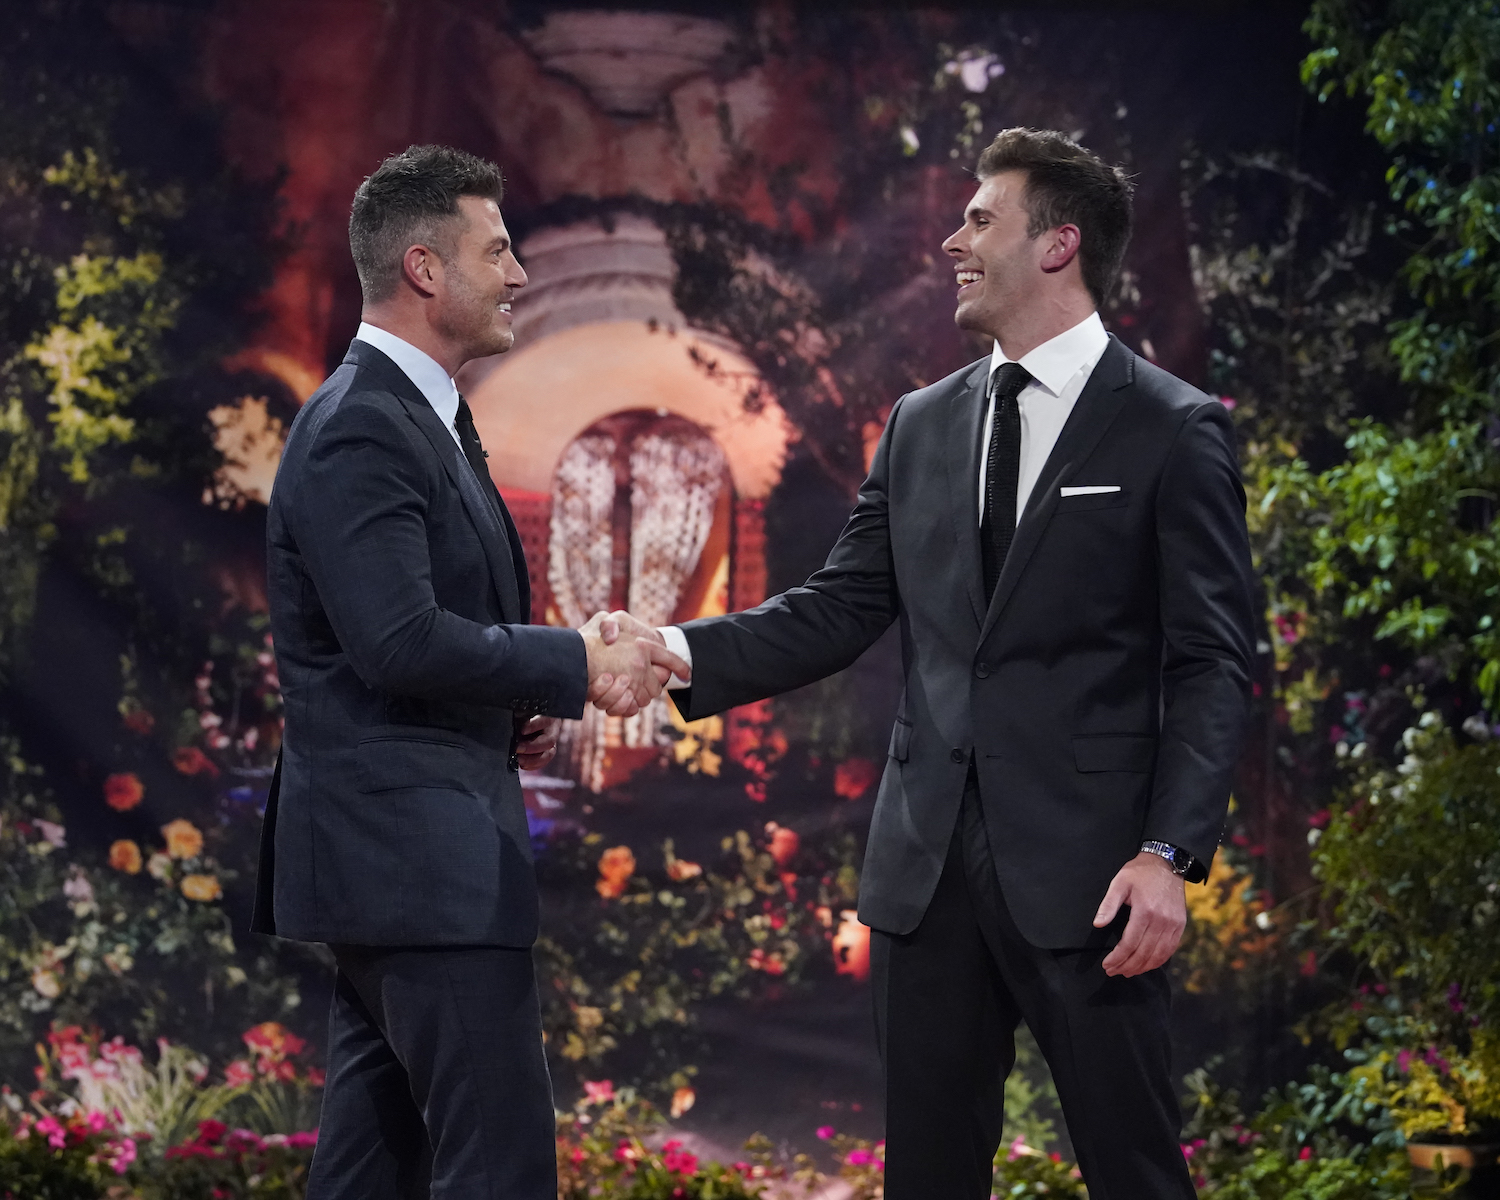 Jesse Palmer and Zach Shallcross on stage. Zach is the lead for 'The Bachelor' Season 27